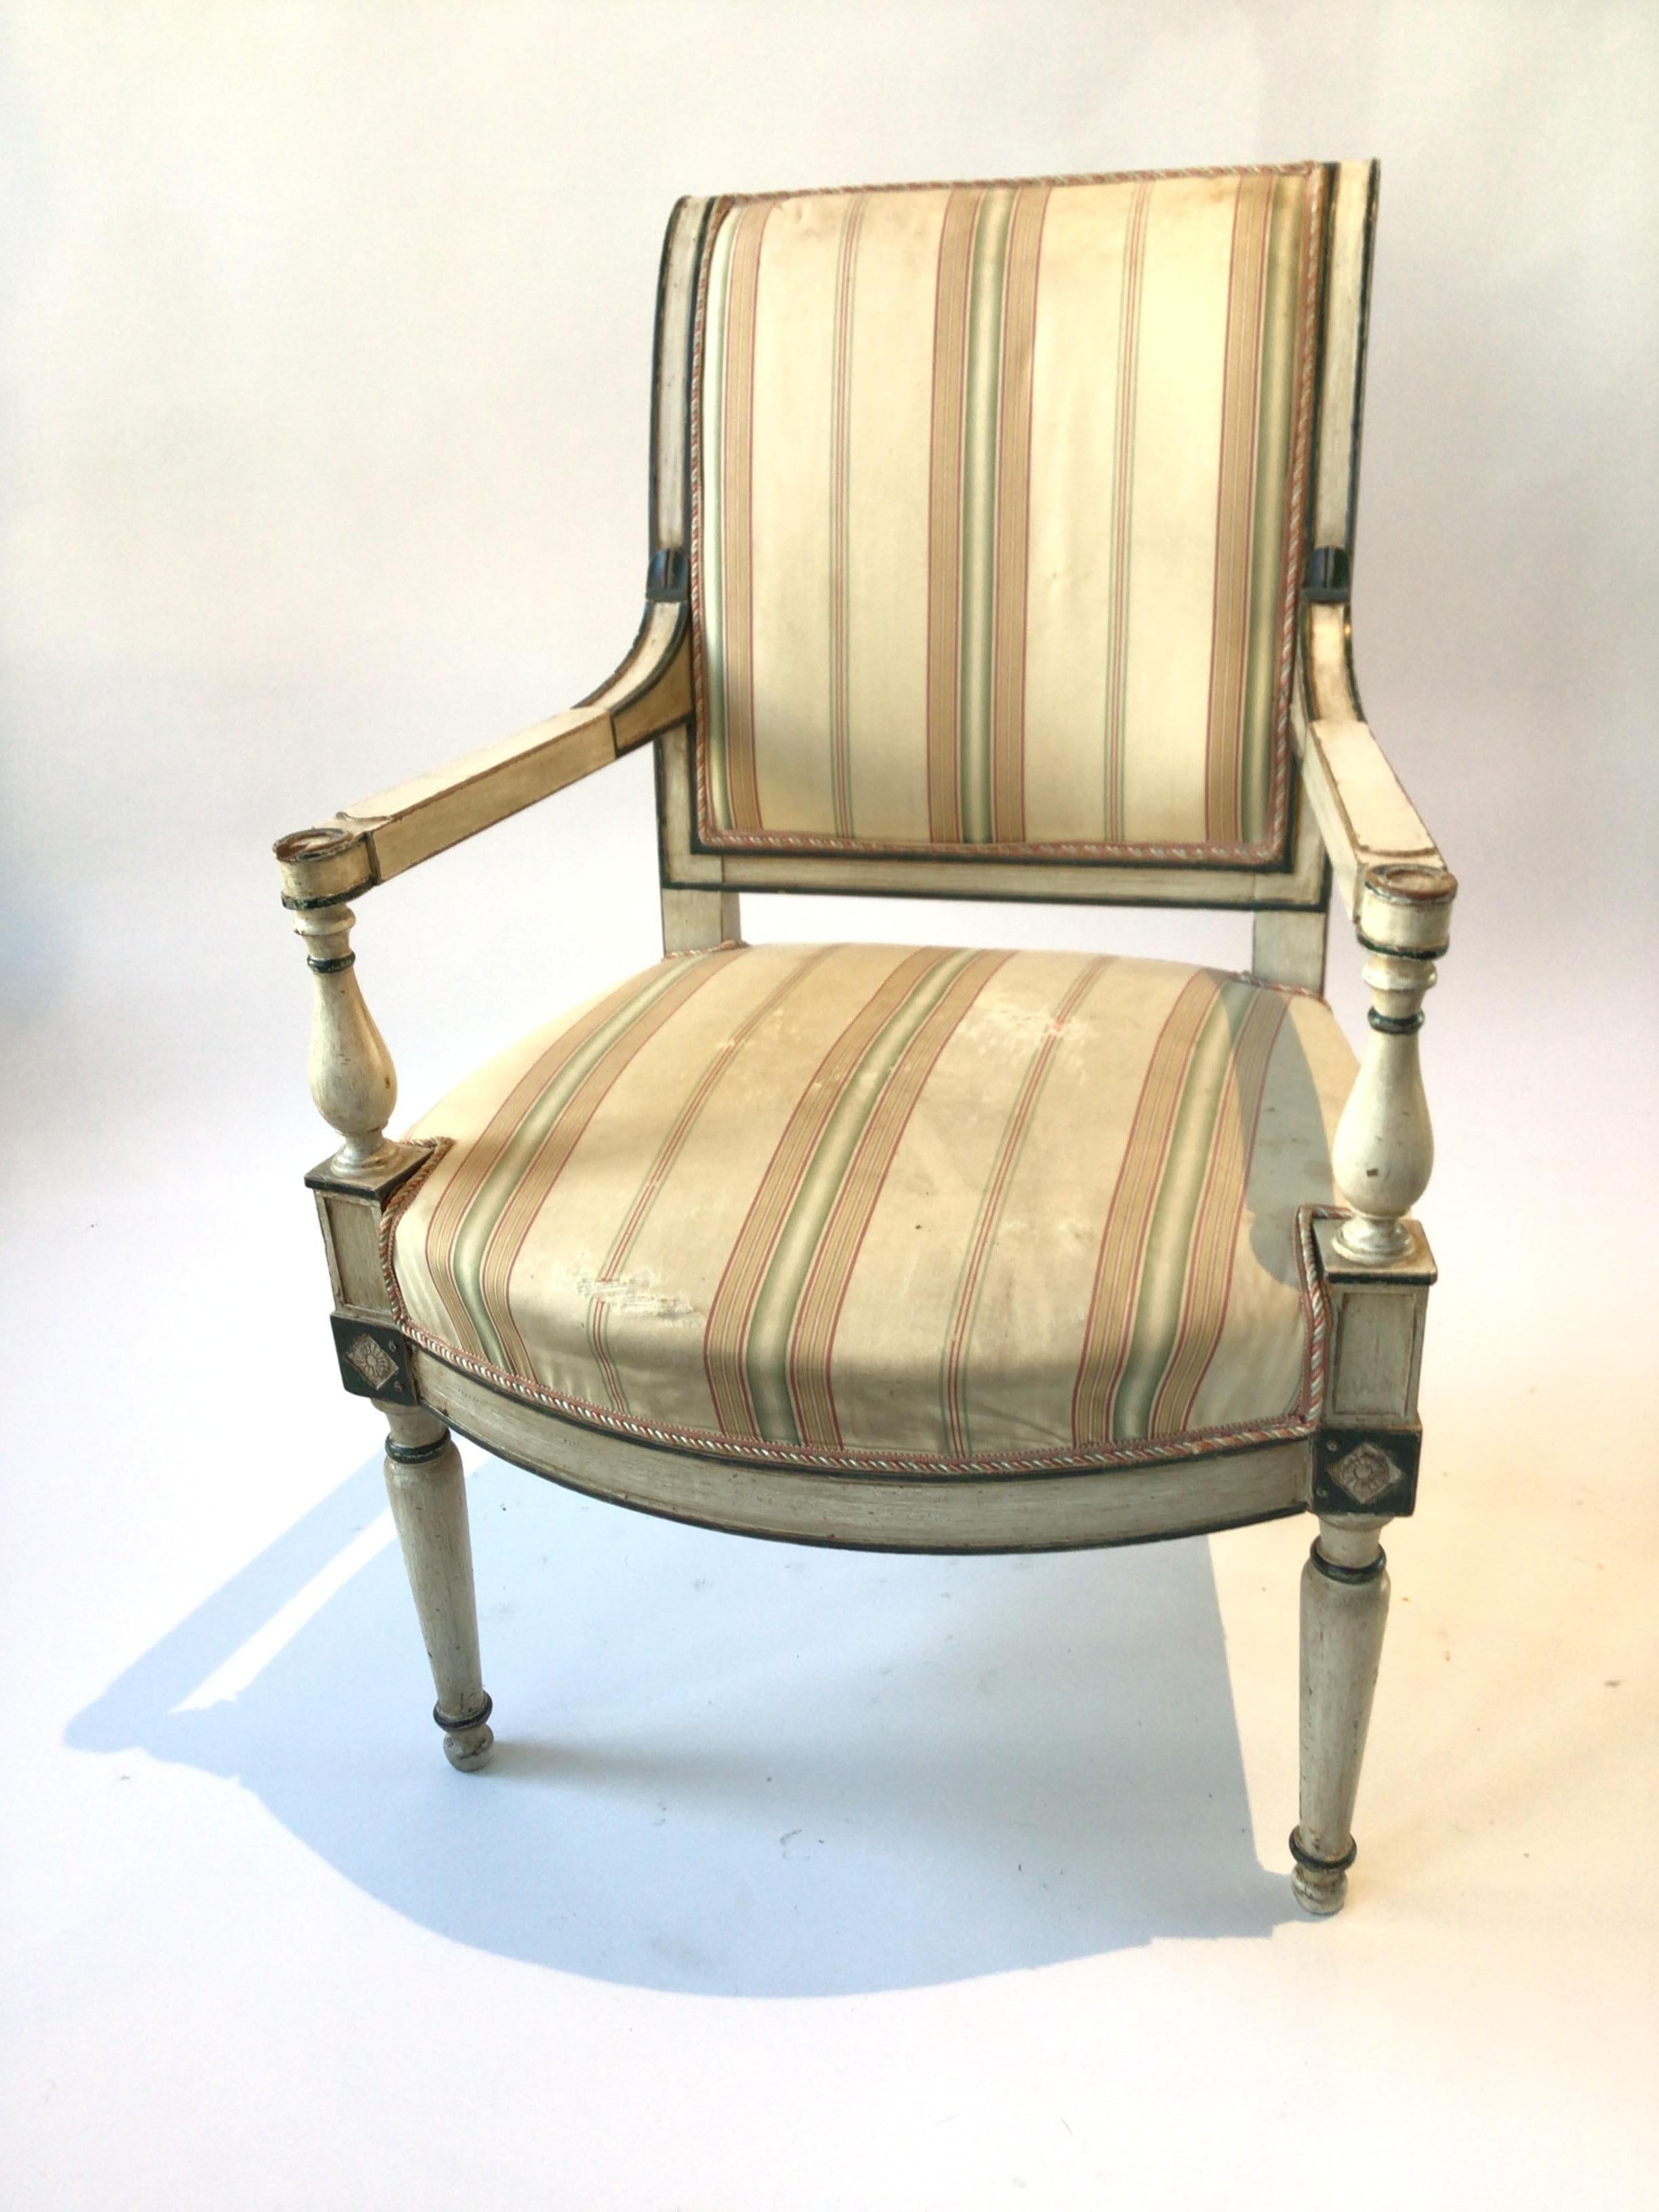 1880s French Directoire painted armchair. Needs reupholstering.